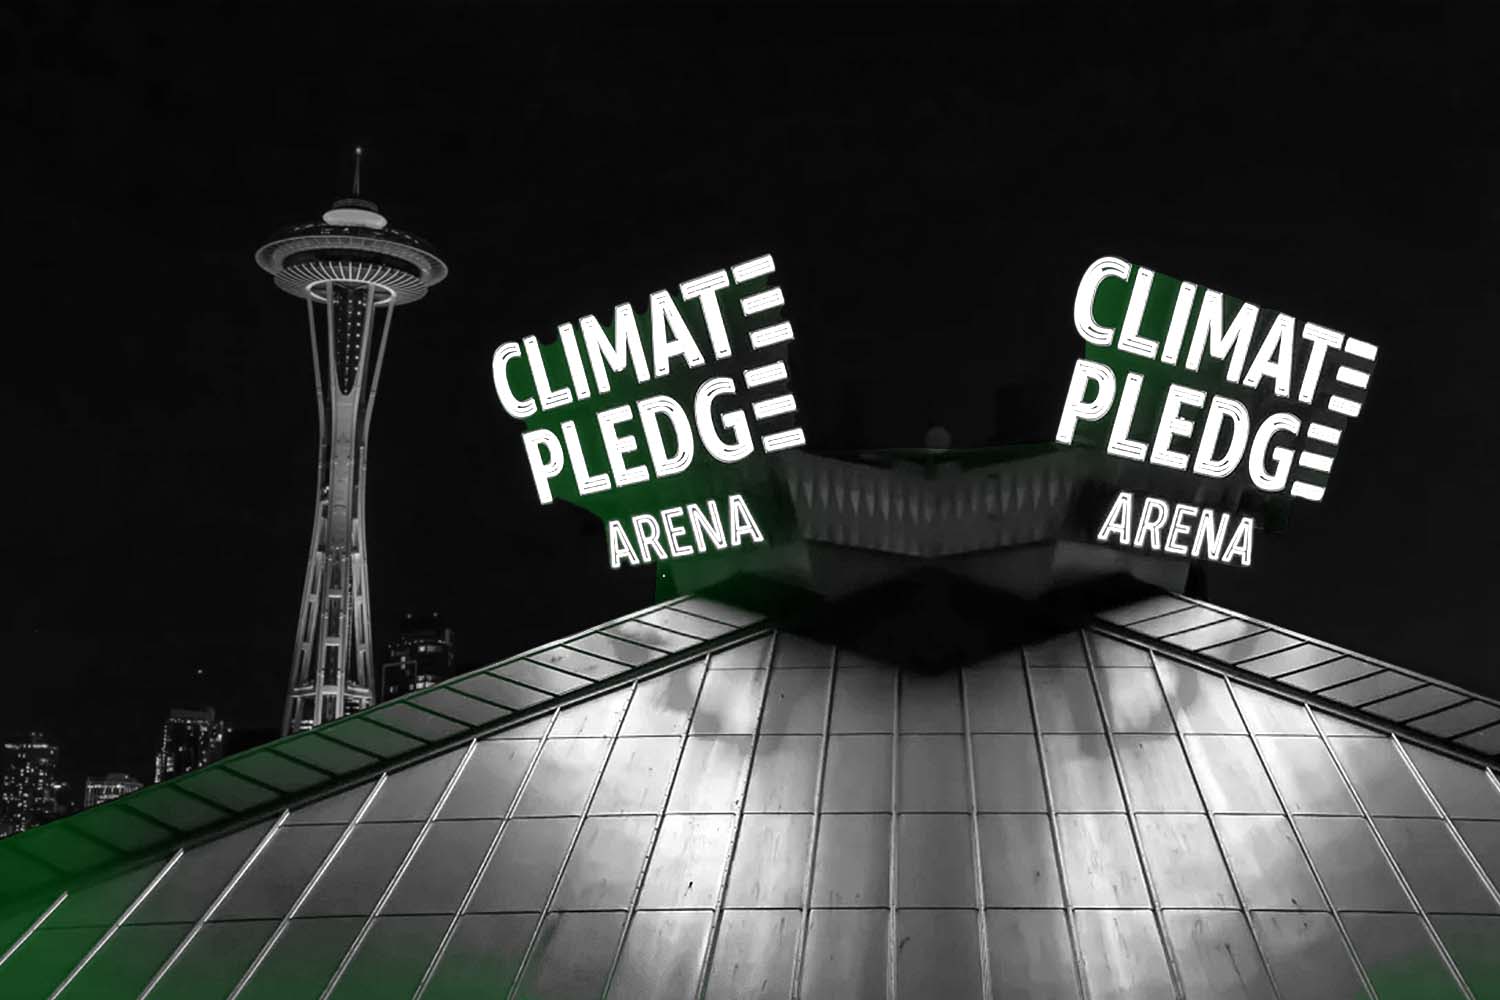 Climate Pledge Arena: History, Capacity, Events & Significance